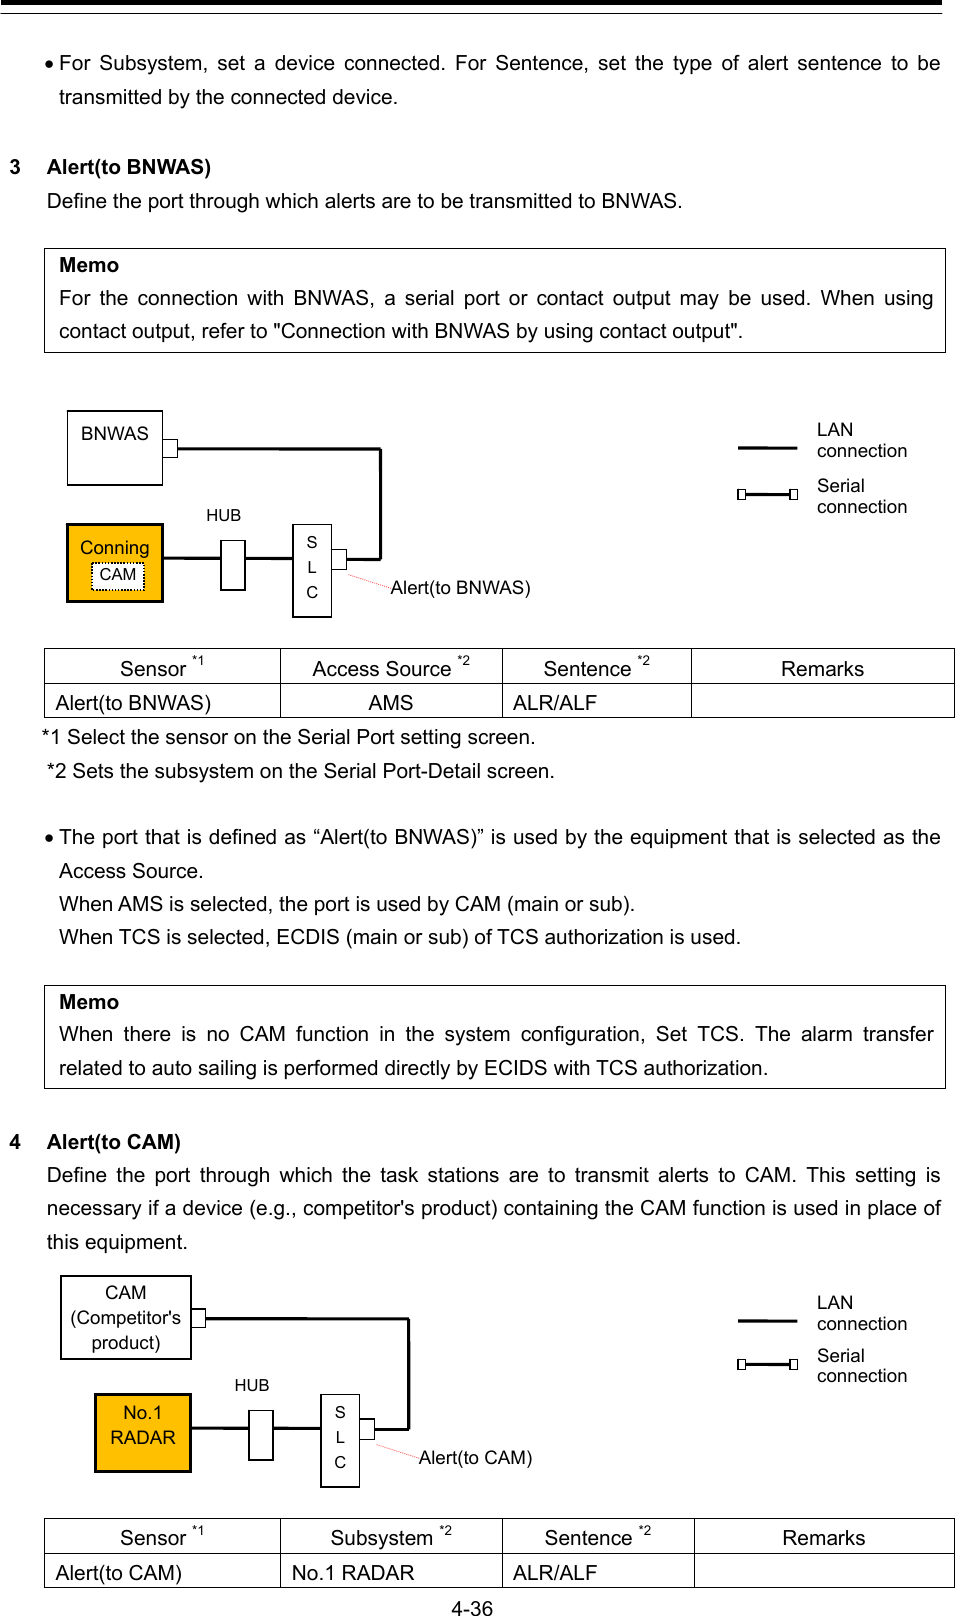  4-36  For Subsystem, set a device connected. For Sentence, set the type of alert sentence to be transmitted by the connected device.  3 Alert(to BNWAS) Define the port through which alerts are to be transmitted to BNWAS.  Memo For the connection with BNWAS, a serial port or contact output may be used. When using contact output, refer to &quot;Connection with BNWAS by using contact output&quot;.   Sensor *1 Access Source *2 Sentence *2 Remarks Alert(to BNWAS)  AMS  ALR/ALF   *1 Select the sensor on the Serial Port setting screen. *2 Sets the subsystem on the Serial Port-Detail screen.   The port that is defined as “Alert(to BNWAS)” is used by the equipment that is selected as the Access Source. When AMS is selected, the port is used by CAM (main or sub).   When TCS is selected, ECDIS (main or sub) of TCS authorization is used.  Memo When there is no CAM function in the system configuration, Set TCS. The alarm transfer related to auto sailing is performed directly by ECIDS with TCS authorization.    4 Alert(to CAM) Define the port through which the task stations are to transmit alerts to CAM. This setting is necessary if a device (e.g., competitor&apos;s product) containing the CAM function is used in place of this equipment.  Sensor *1 Subsystem *2 Sentence *2 Remarks Alert(to CAM)  No.1 RADAR  ALR/ALF   No.1 RADAR S L C Alert(to CAM) LAN connection Serial connectionHUB  CAM (Competitor&apos;s product) Conning CAM S L C Alert(to BNWAS) LAN connection Serial connectionHUB  BNWAS 